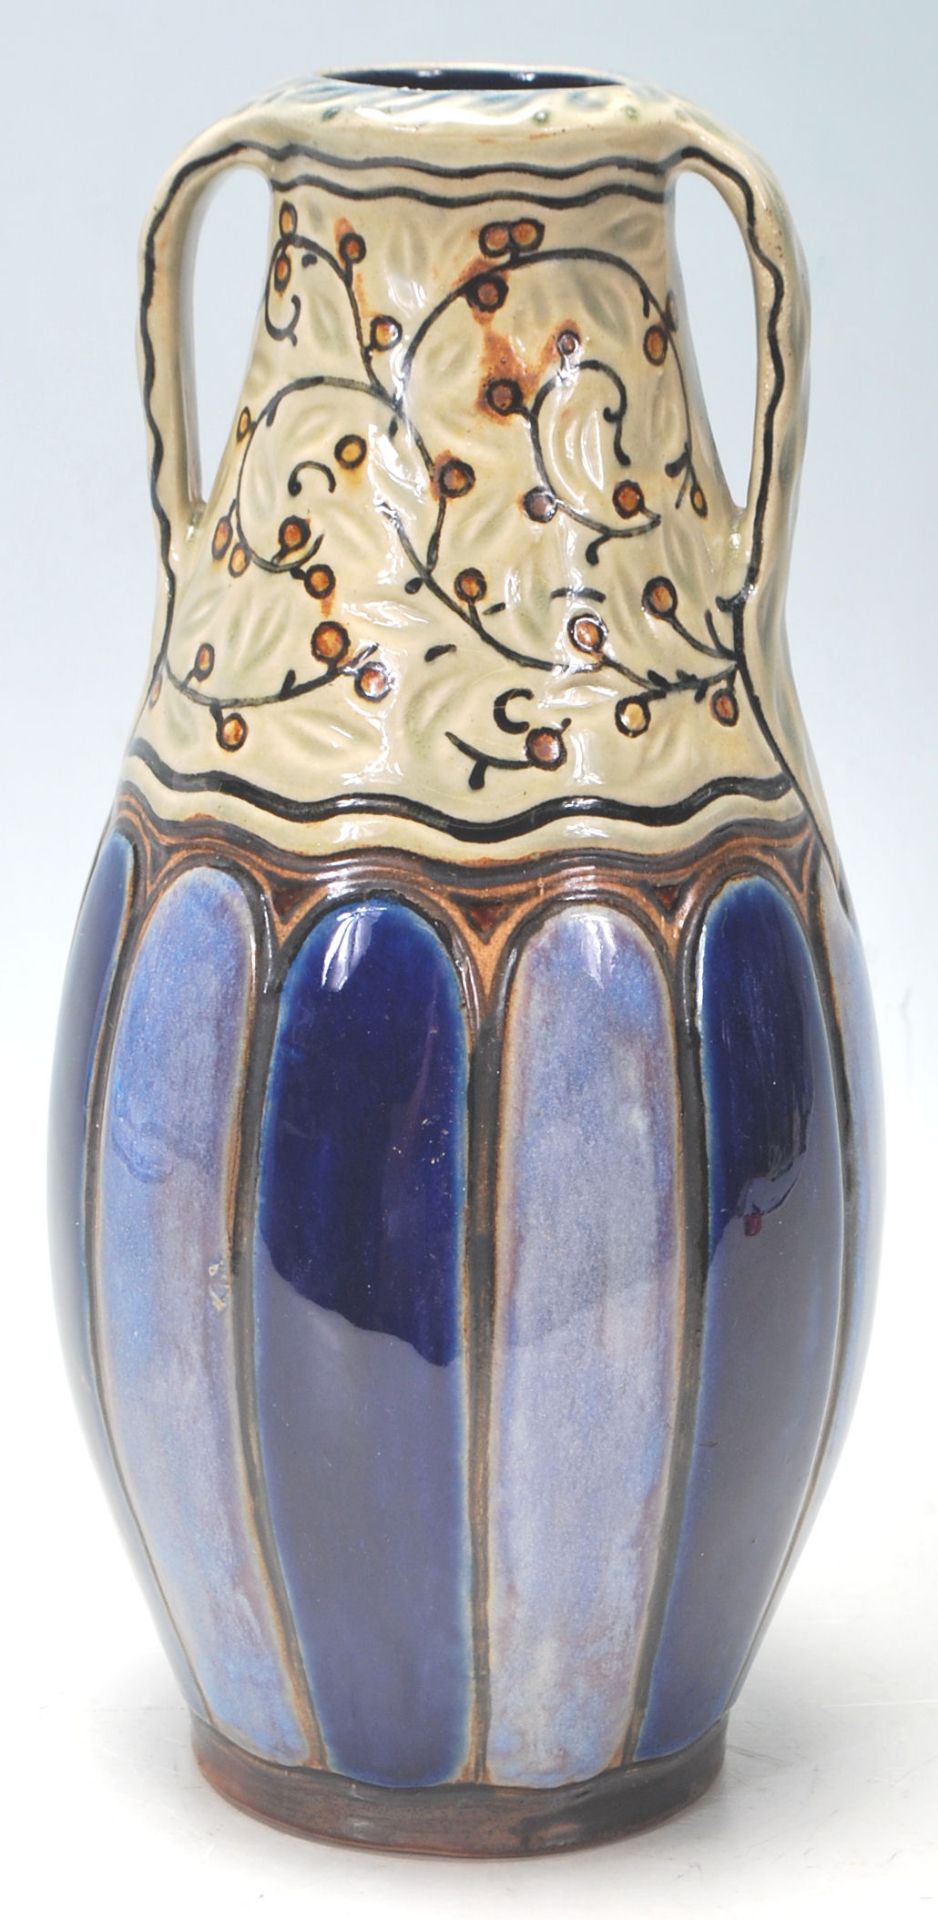 An early 20th Century Royal Doulton Lambeth stoneware large mantel vase in tapered form having